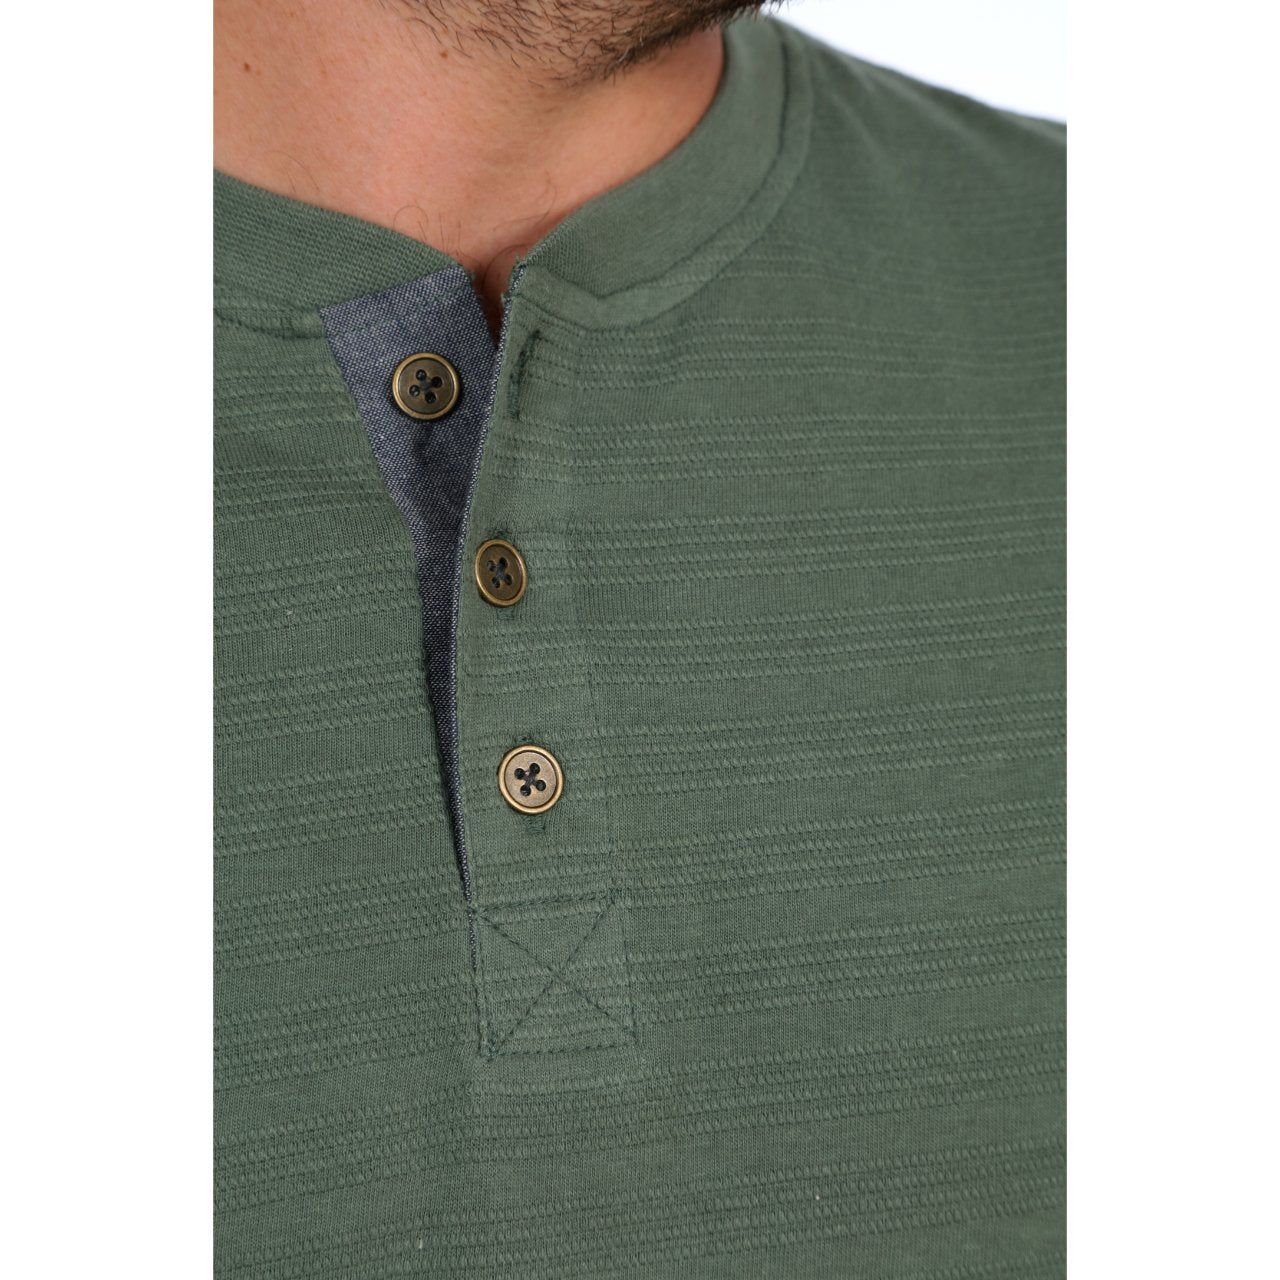 Olive Green Long Sleeve Henley for Men close up of collar